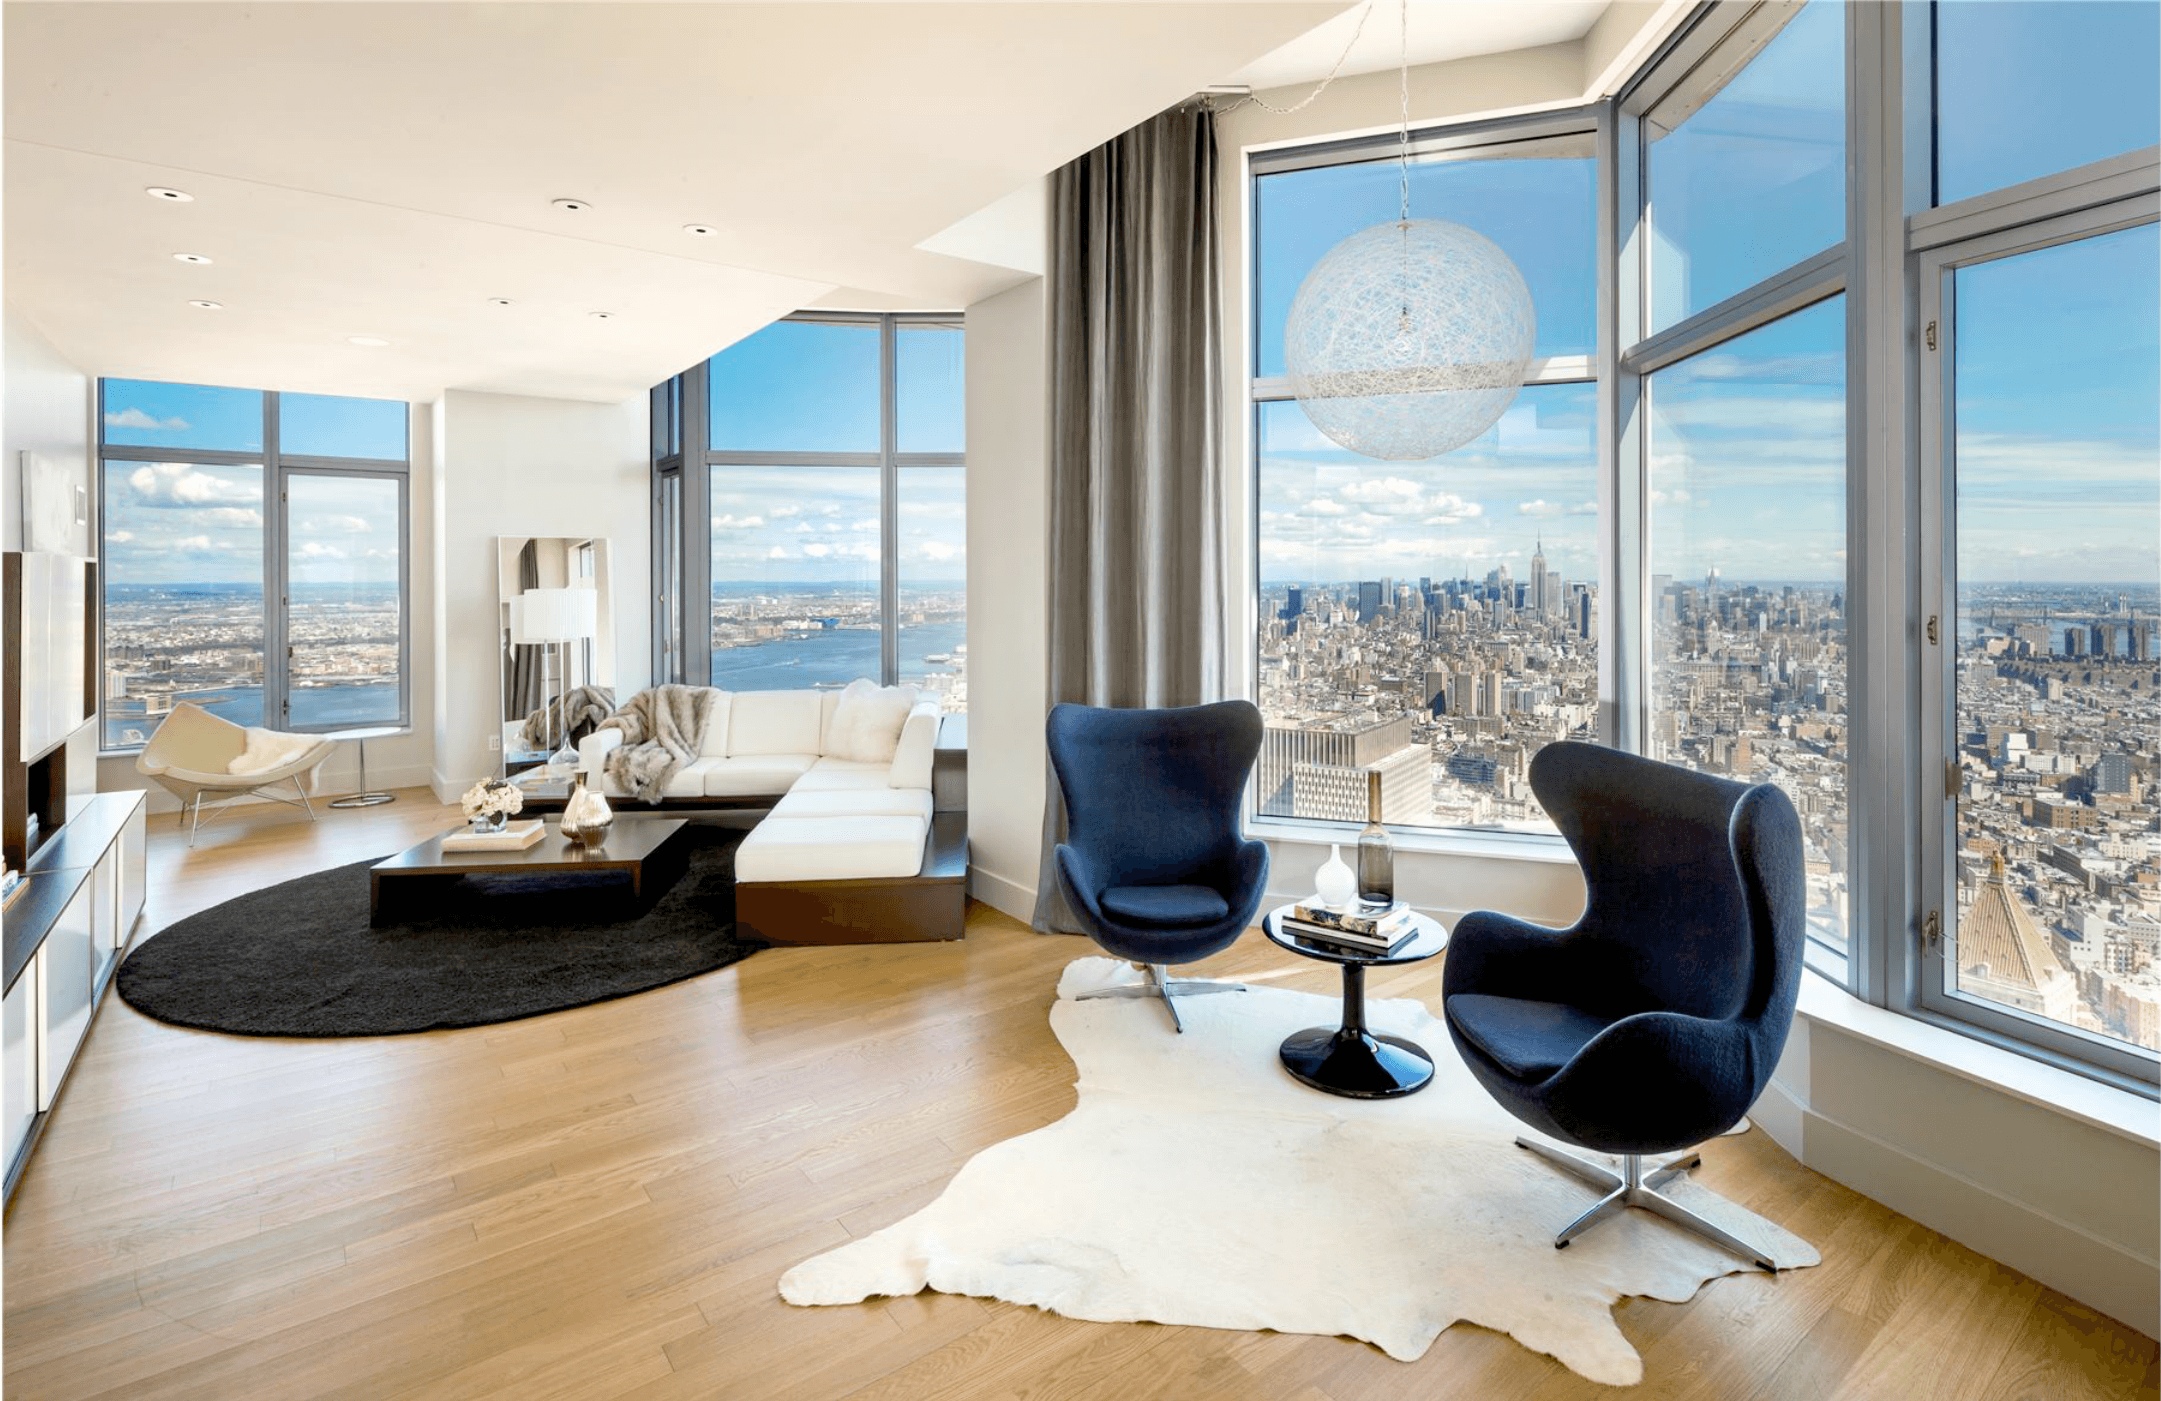 NYC ~~ Penthouse in New York's Hottest Residential Highrise ~  76th Floor ~ Over 3,700 square feet ~~ 4 Bedroom 3.5 Baths ~~ NO FEE